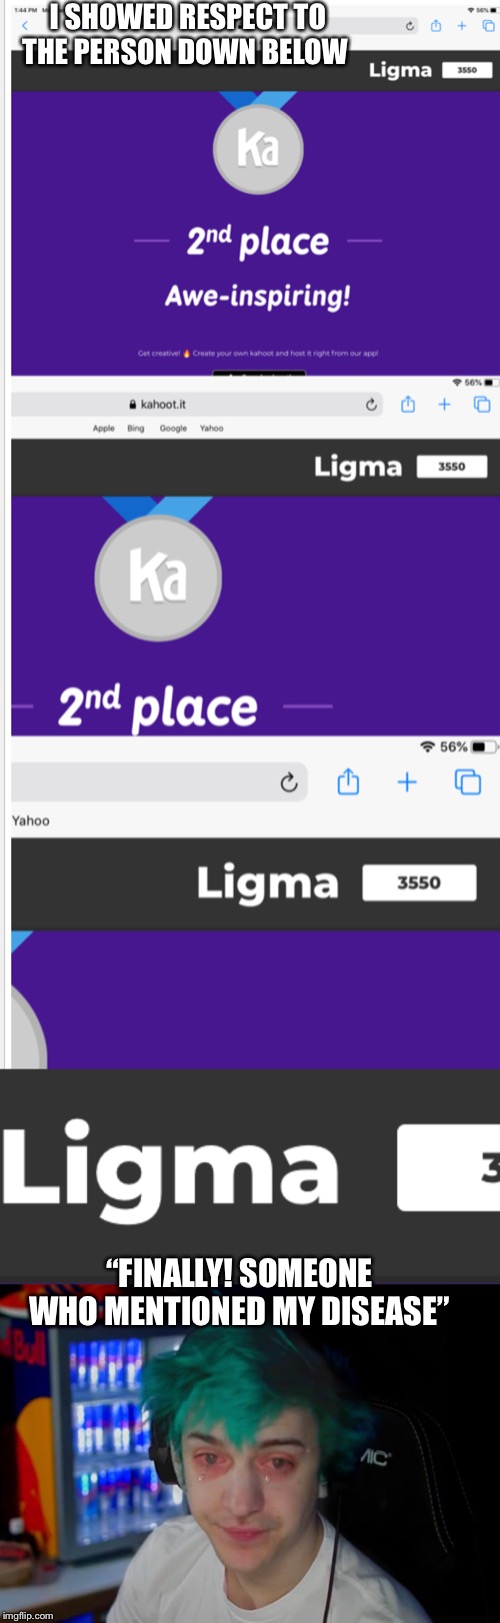 Finally, my Ligma has been mentioned! | I SHOWED RESPECT TO THE PERSON DOWN BELOW; “FINALLY! SOMEONE WHO MENTIONED MY DISEASE” | image tagged in ninja,fortnite,ligma,funny memes,meme,kahoot | made w/ Imgflip meme maker